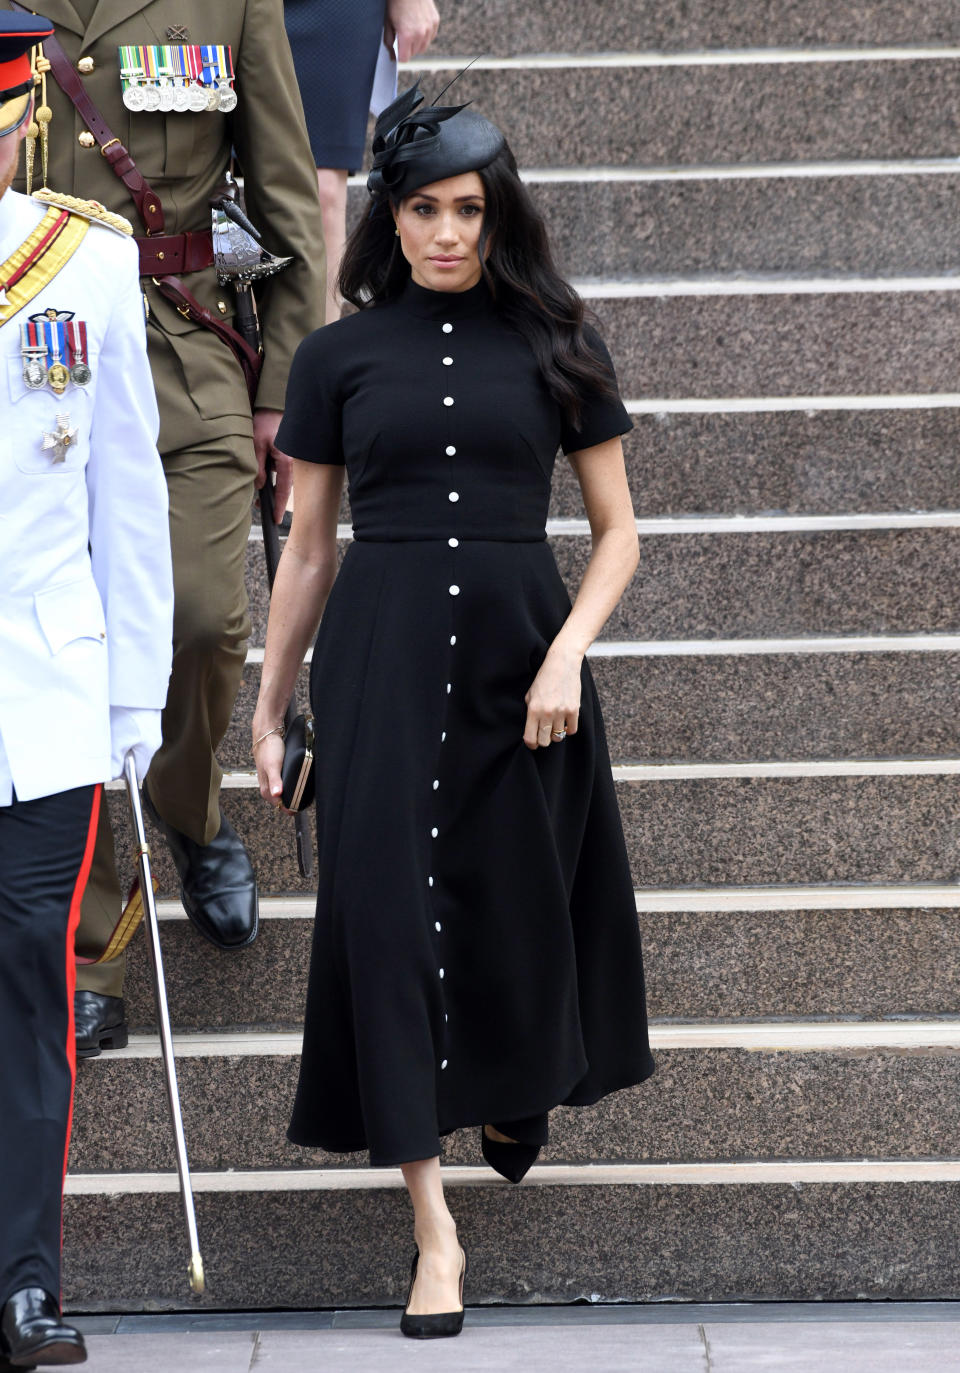 <p>Meghan wore a custom made black Emilia Wickstead dress with a Philip Treacy hat, a satin Givenchy clutch and Tabitha Simmons slingback pumps for the official opening of the extension of the ANZAC Memorial in Hyde Park in Sydney, Australia. <em>[Photo: Getty]</em> </p>